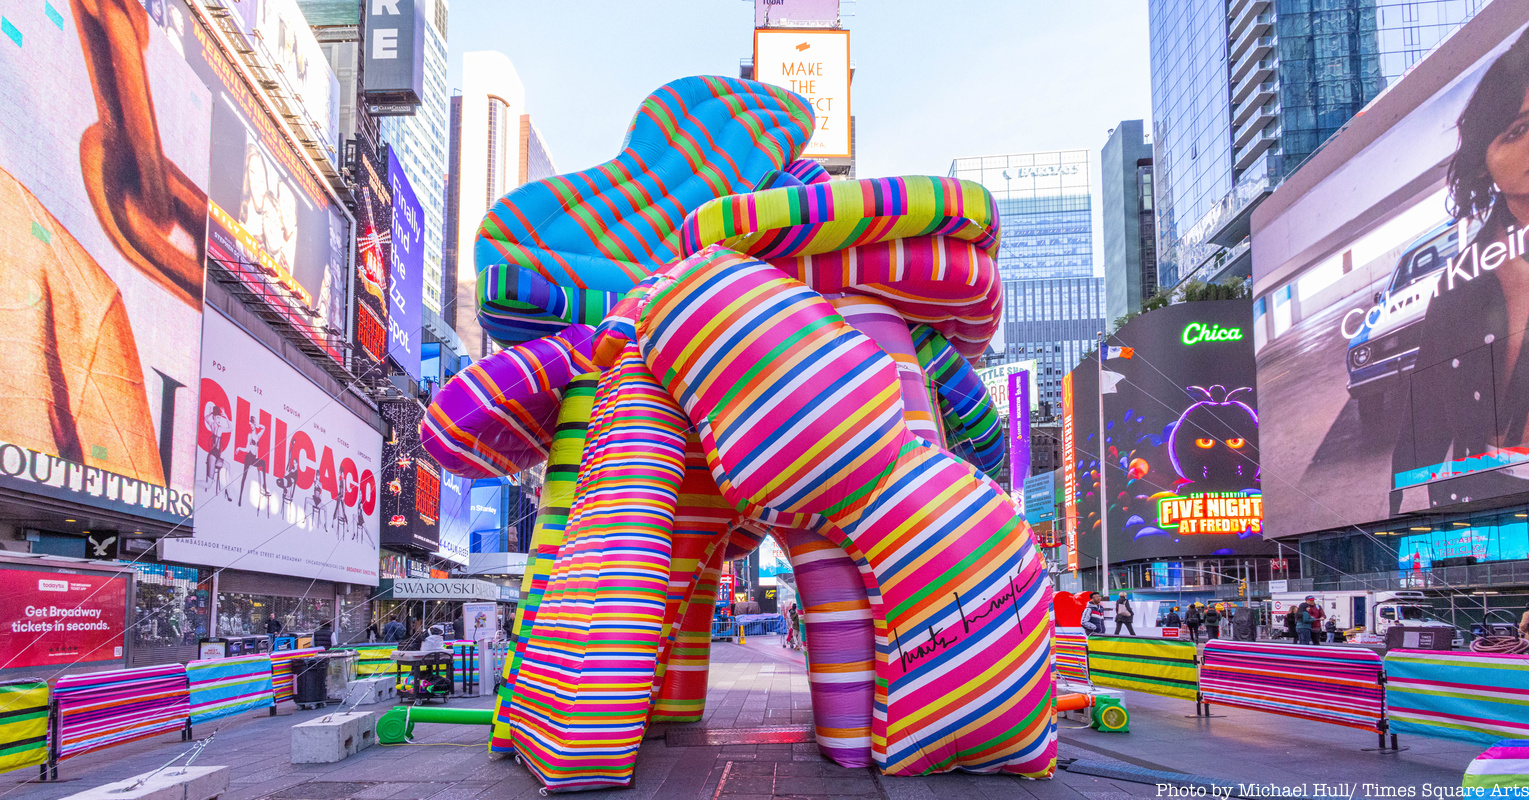 Sculpture of Dreams in Times Square by Marta Minujín